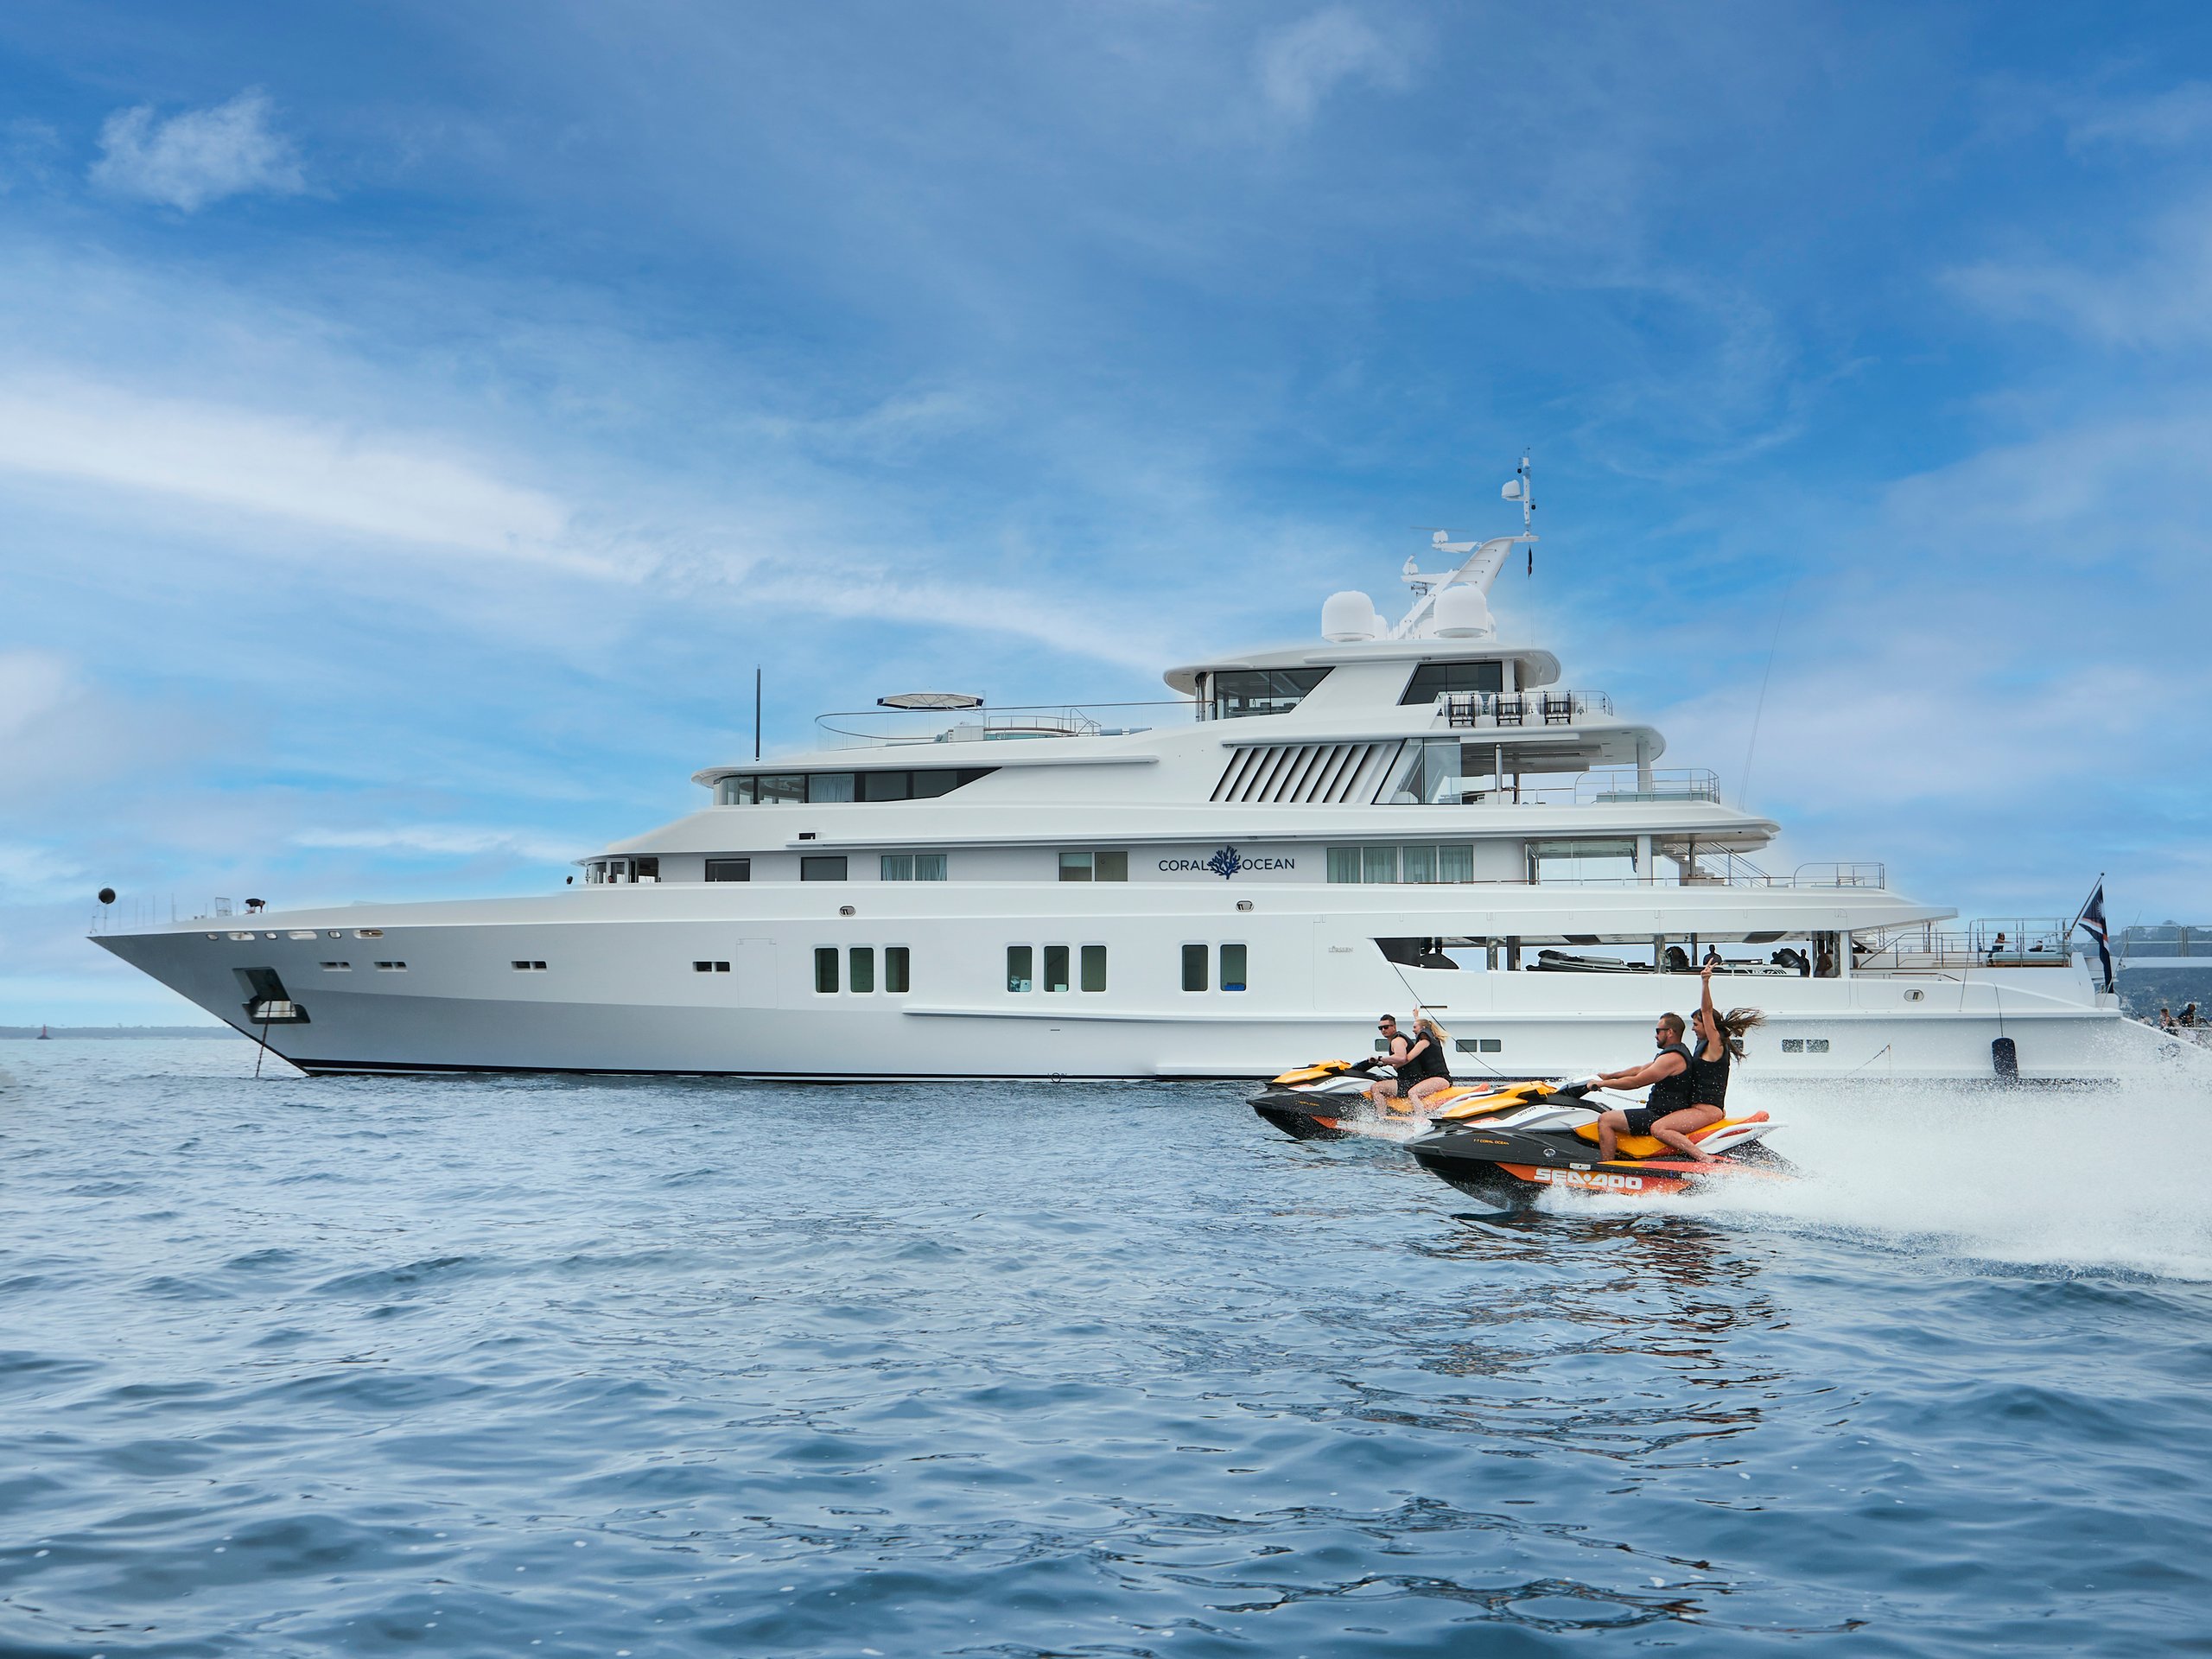 Coral Ocean yacht | Discover Coral Ocean yacht